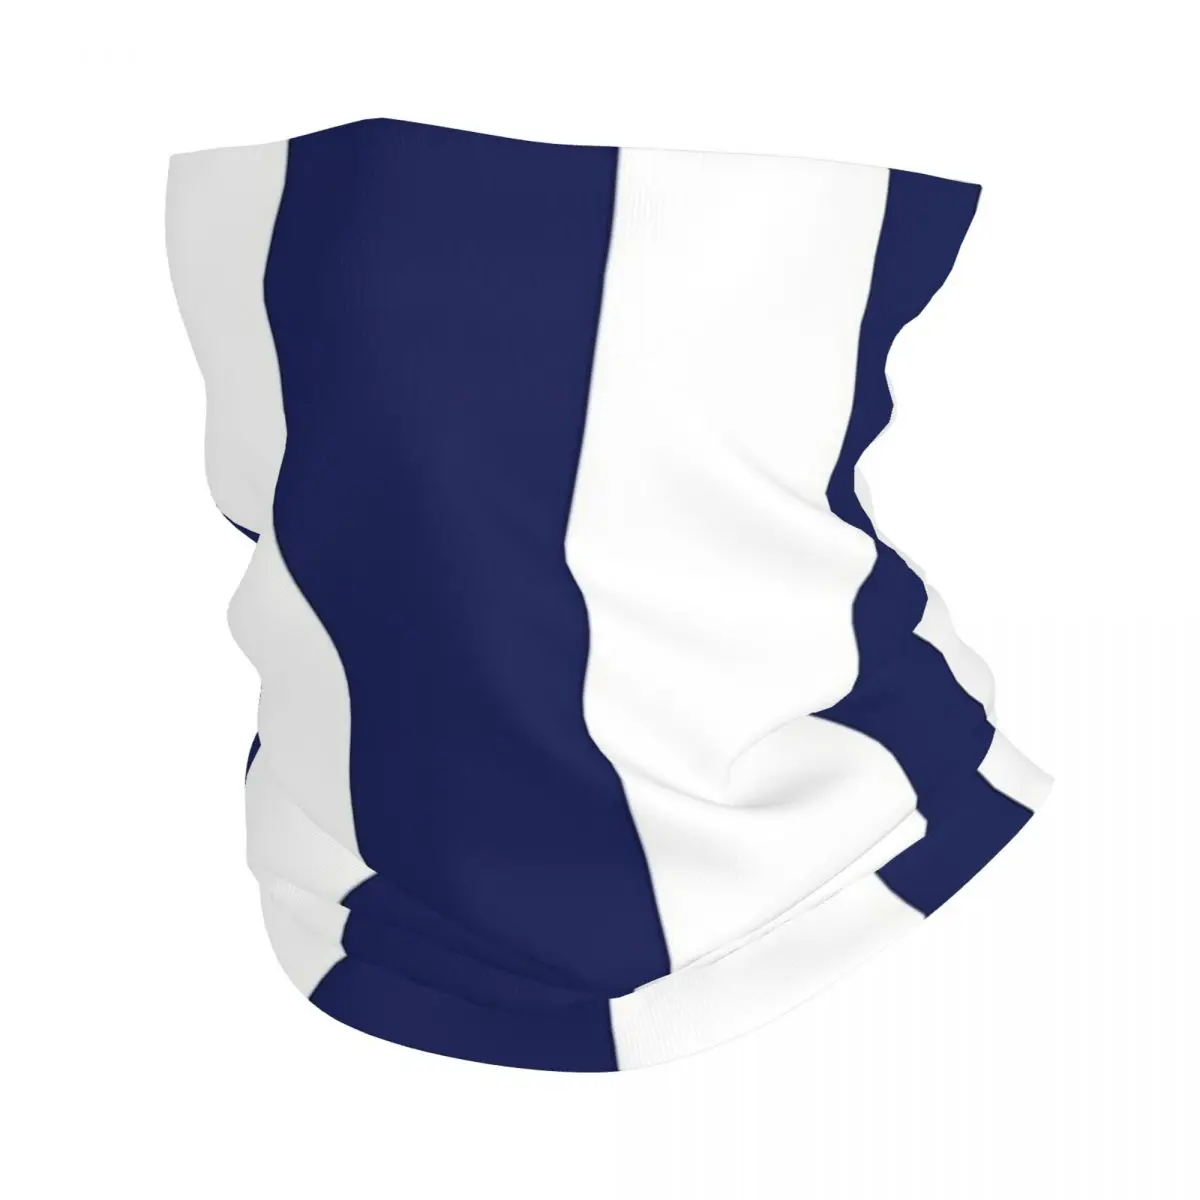 

Navy Blue And White Stripes, Vertical Awning Stripes Bandana Neck Cover Printed Mask Scarf Headband Outdoor Sports For Men Women